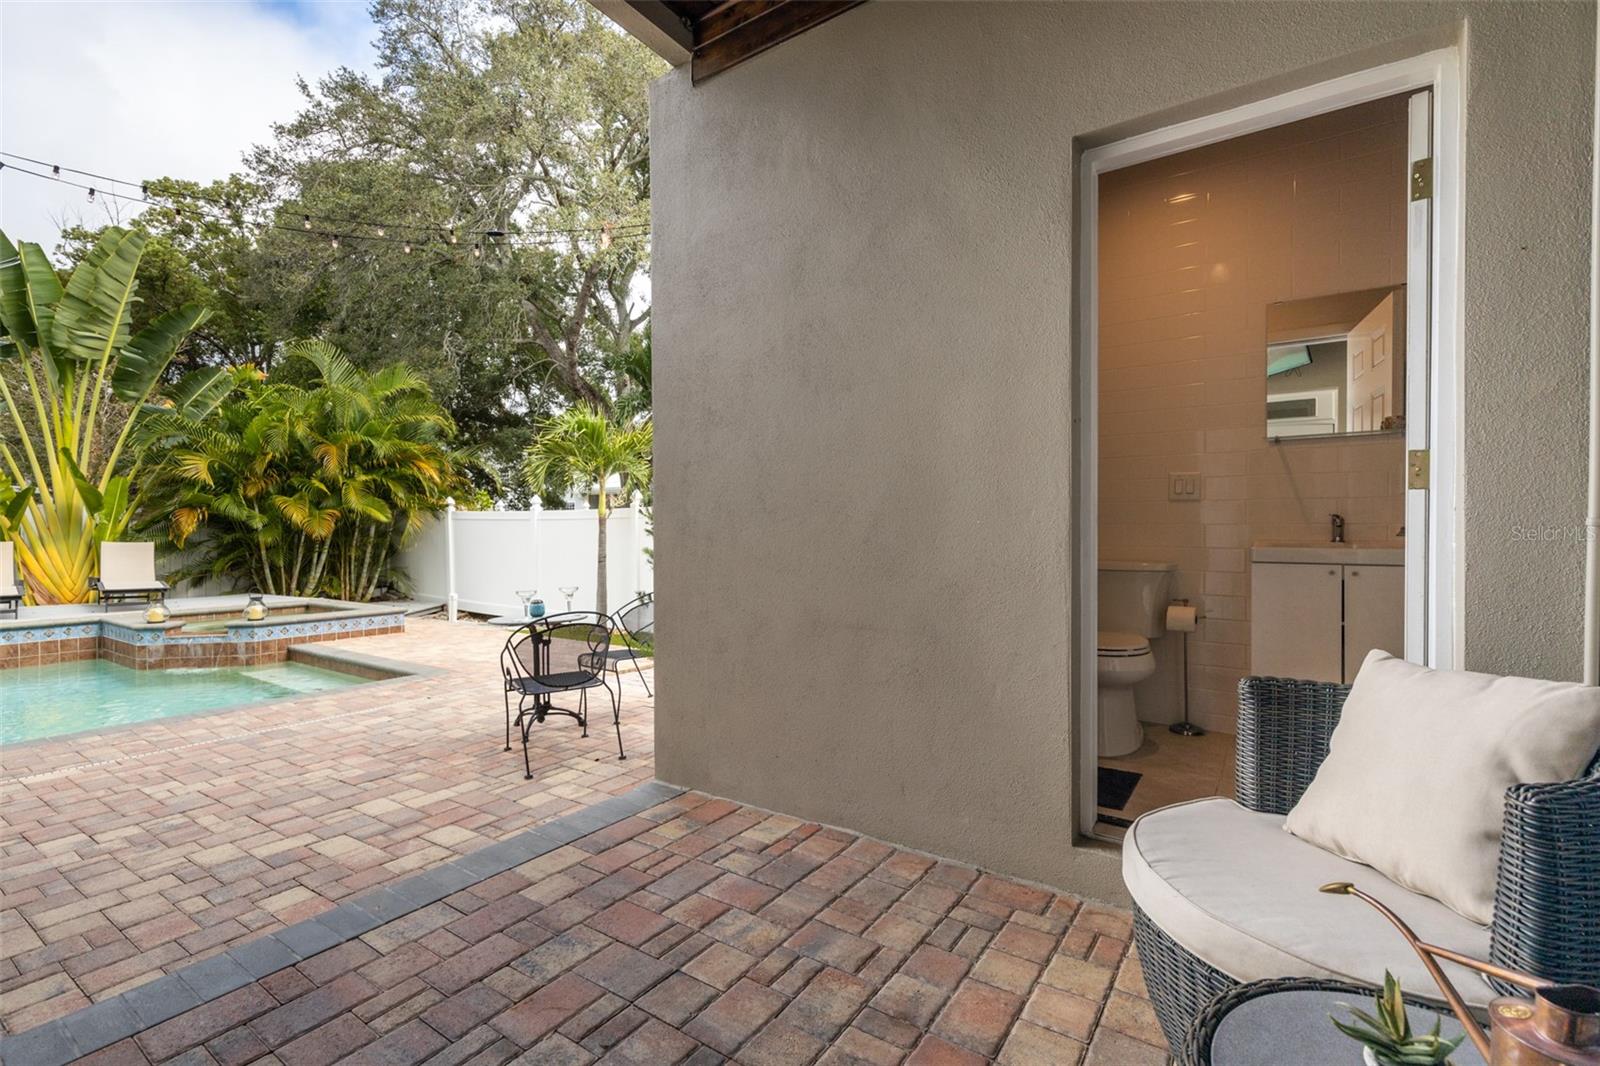 The living room extends to your private covered patio.